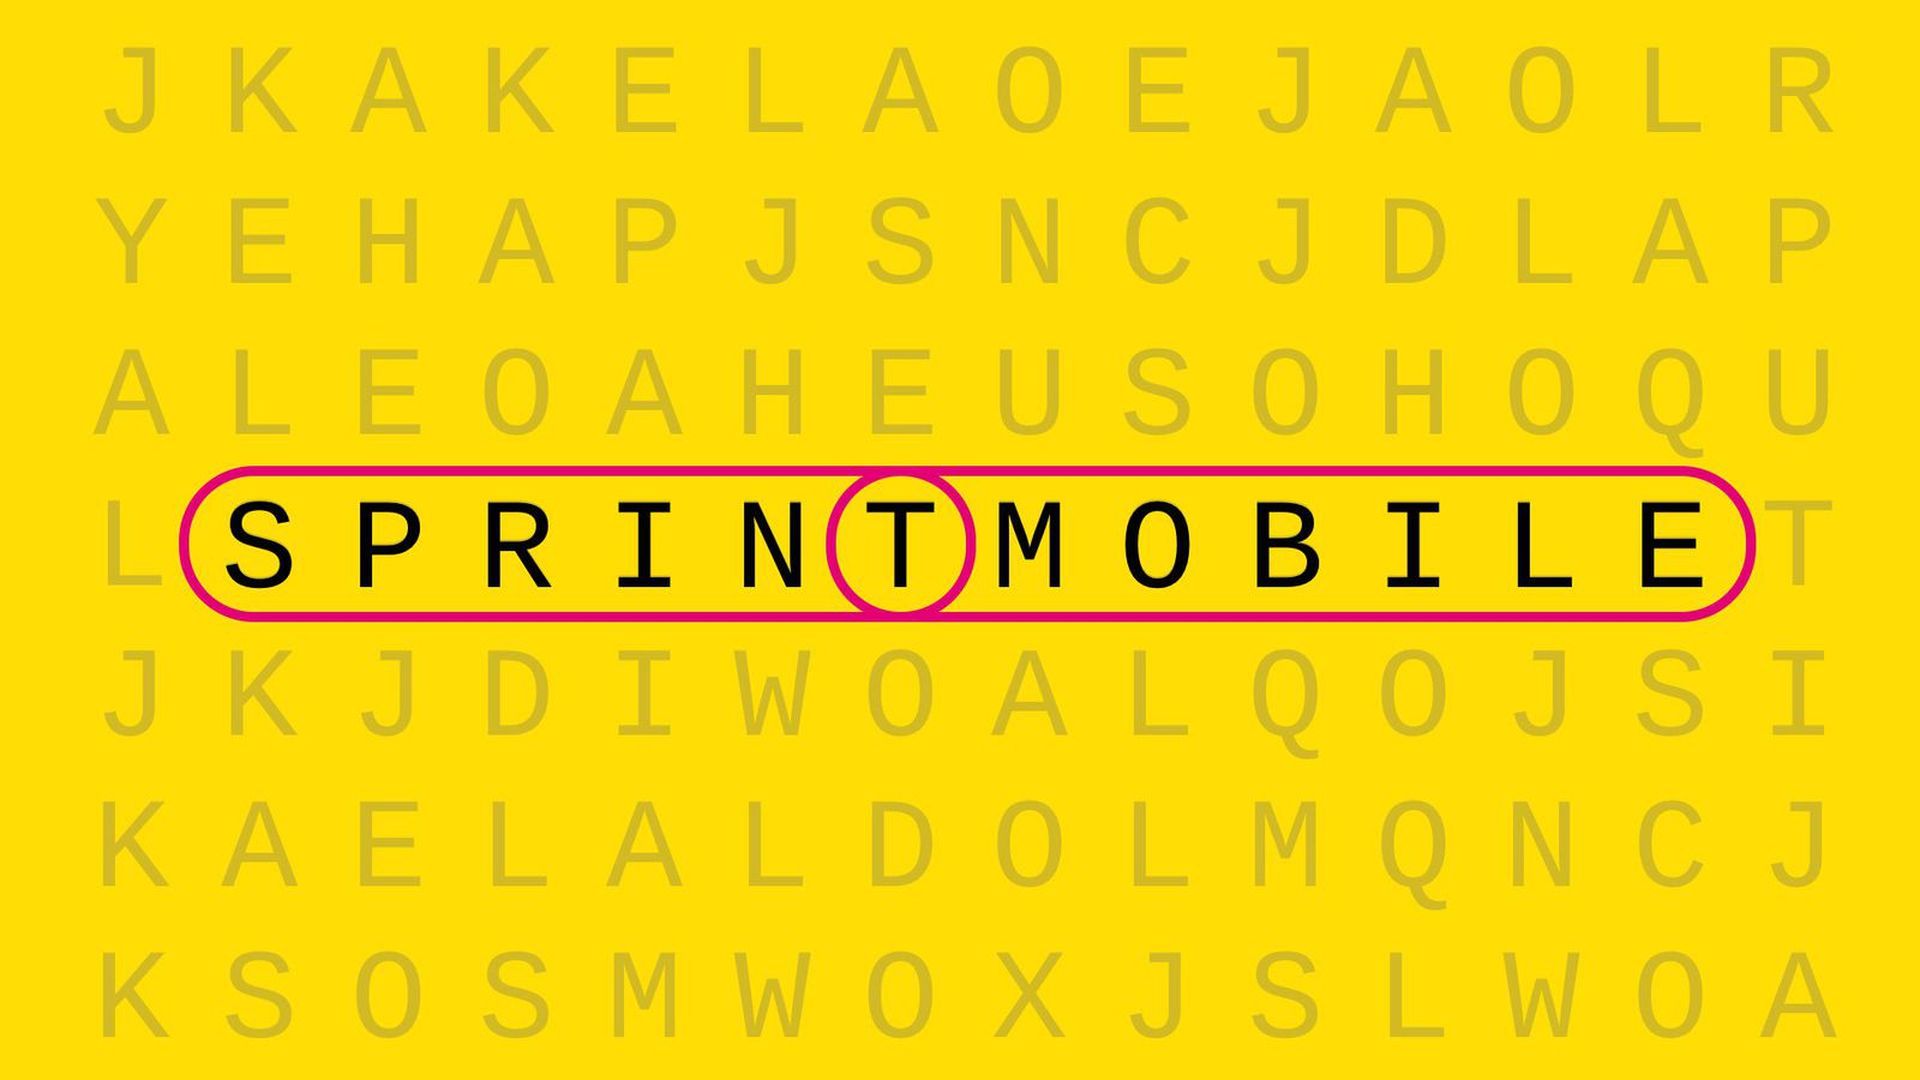 Illustration of a word-finder puzzle with the overlapping words "Sprint" and "TMobile" circled 